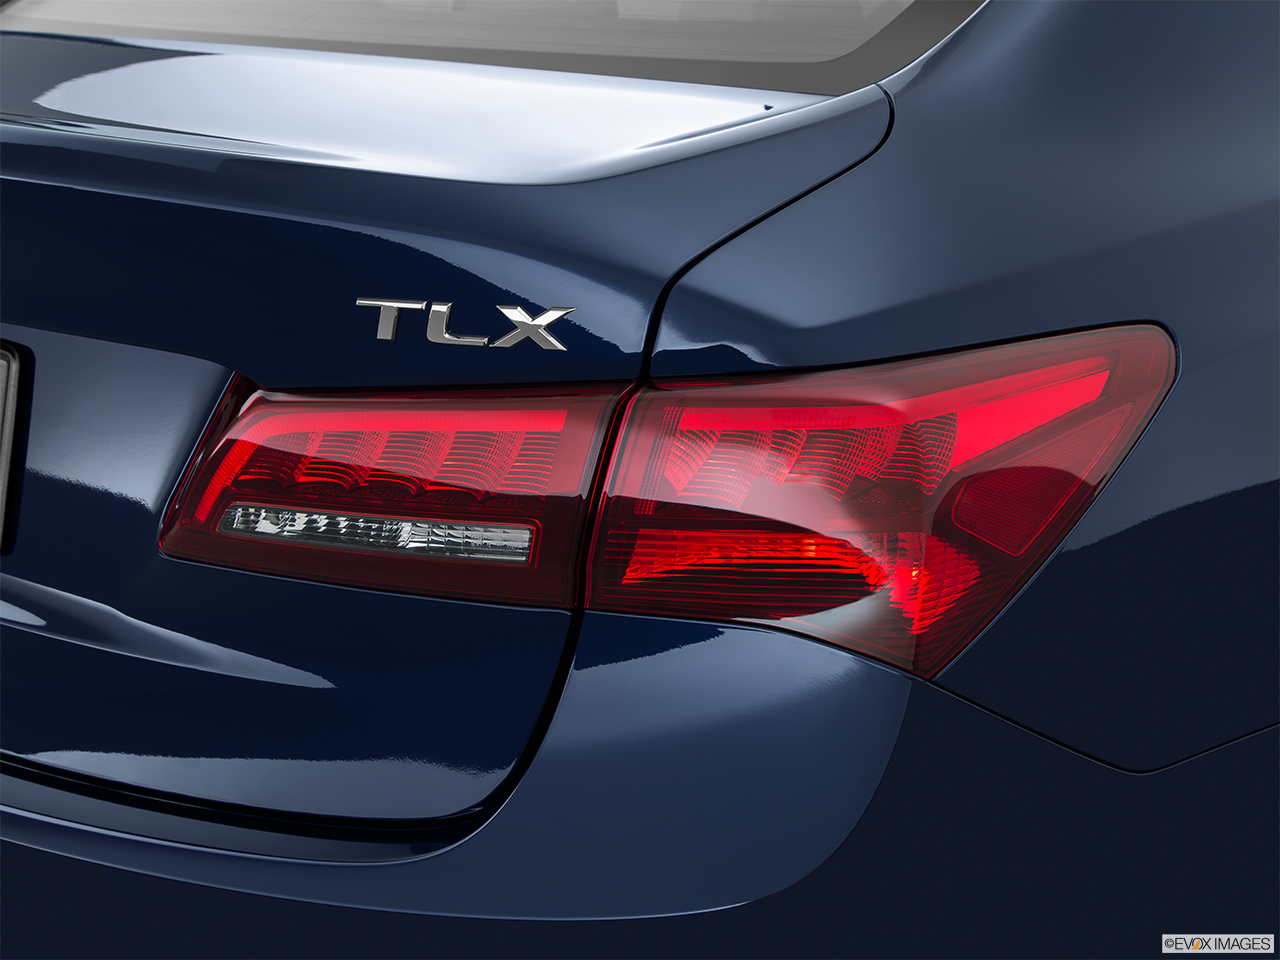 2016 Acura TLX 3.5 V-6 9-AT P-AWS Passenger Side Taillight. 